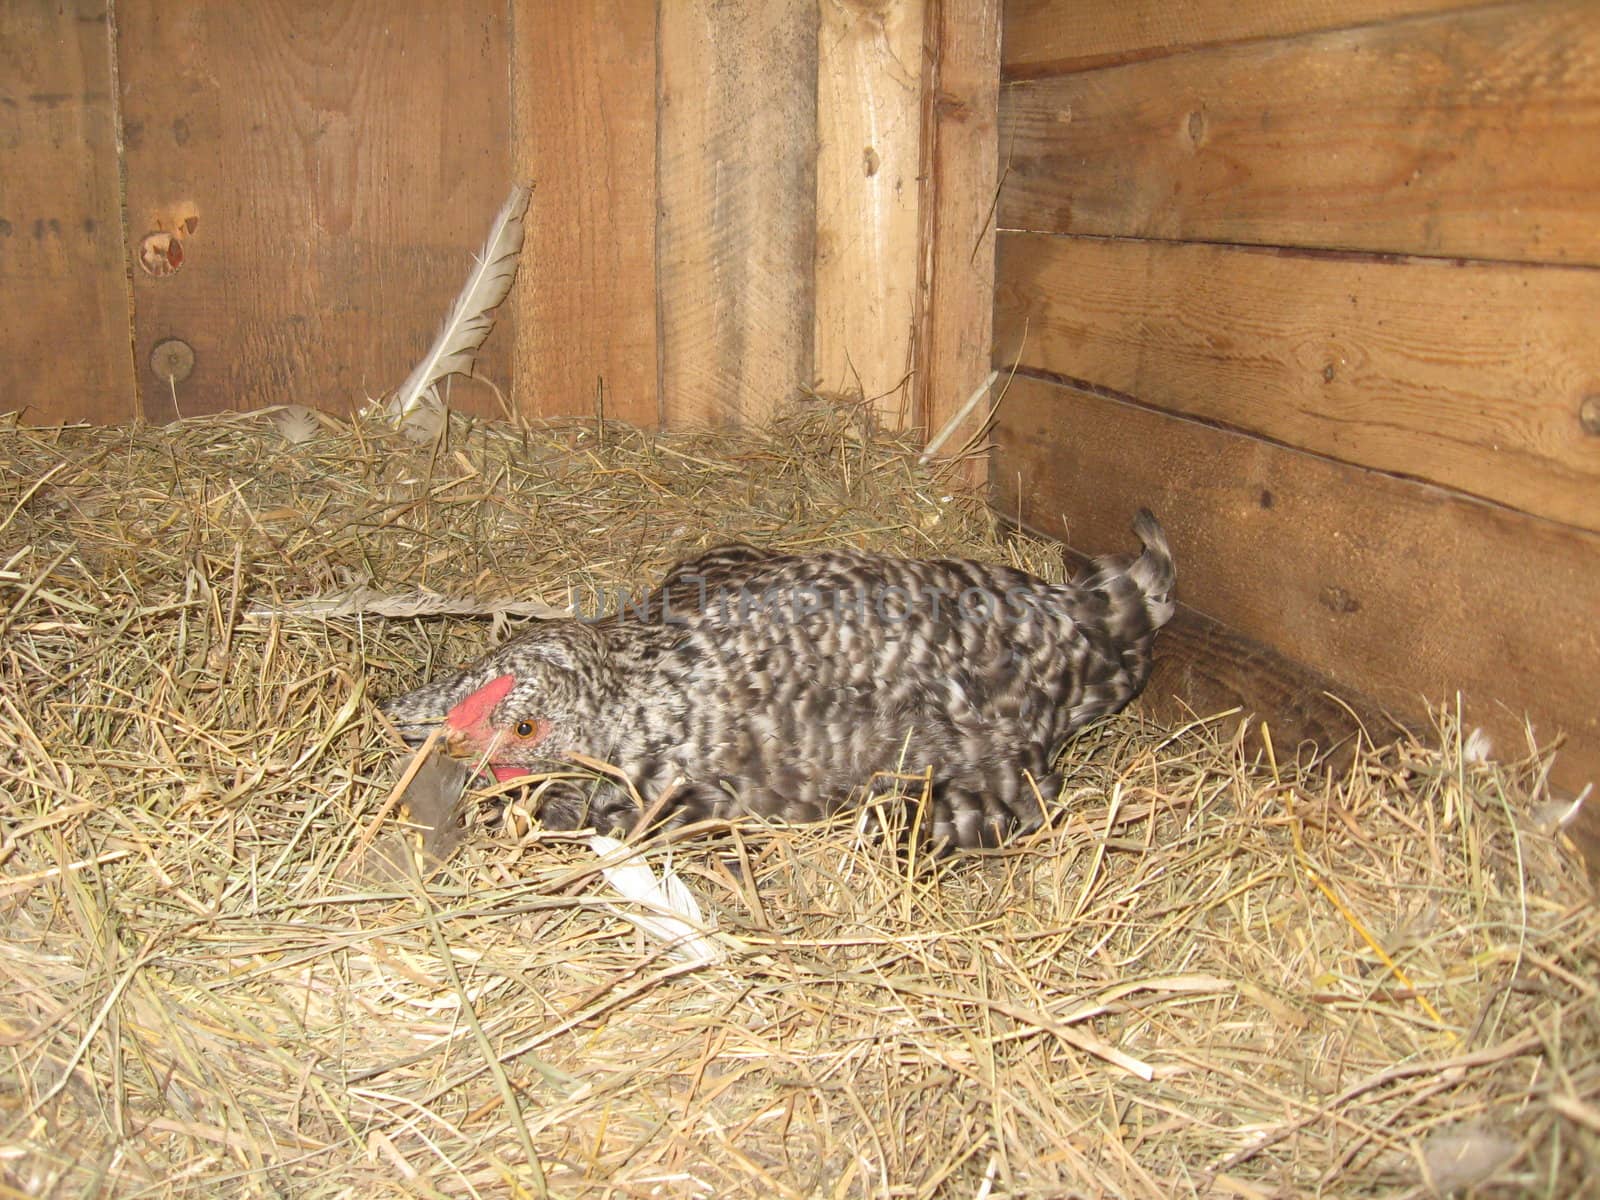 The hen sitting on a nest on the hay